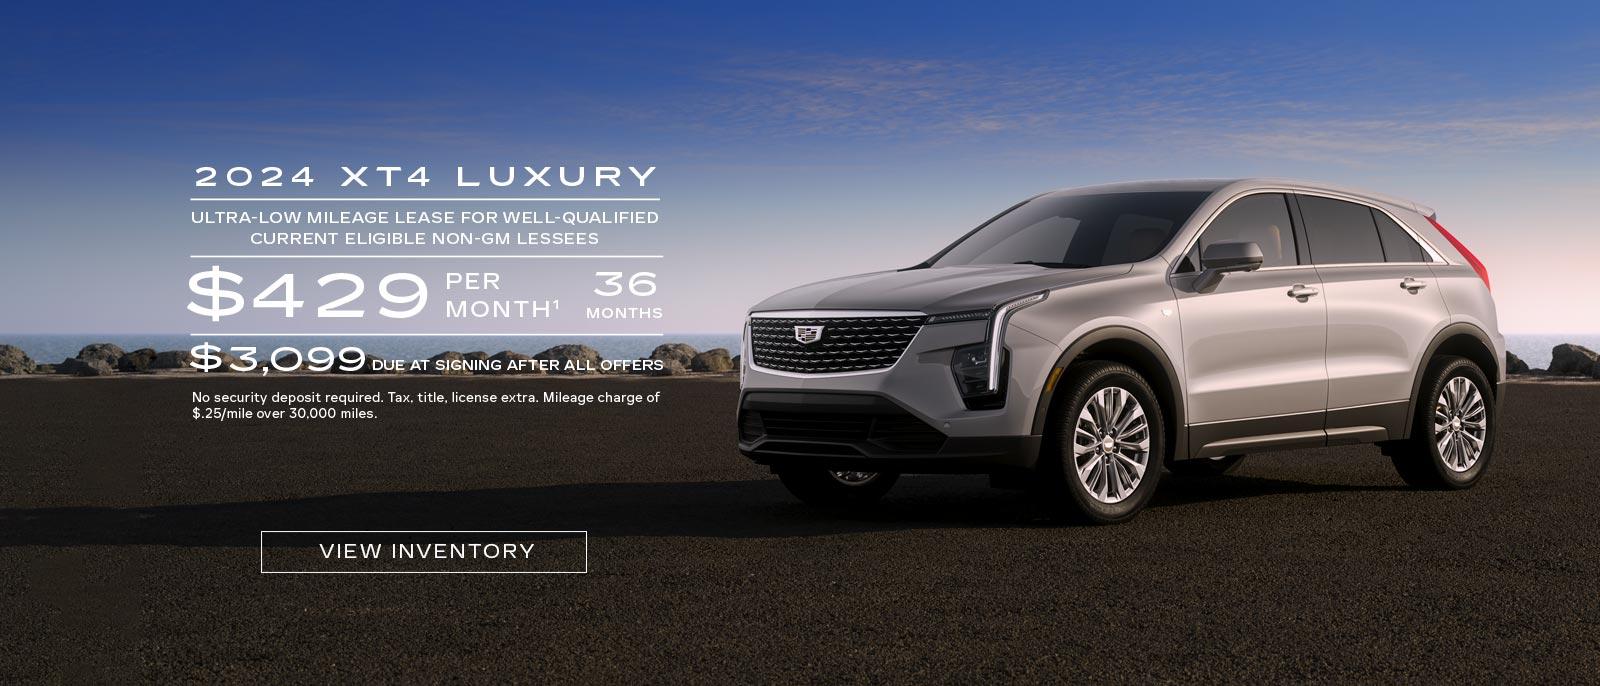 2024 XT4 Luxury. Ultra-low mileage lease for well-qualified current eligible Non-GM Lessees. $429 per month. 36 months. $3,099 due at signing after all offers.